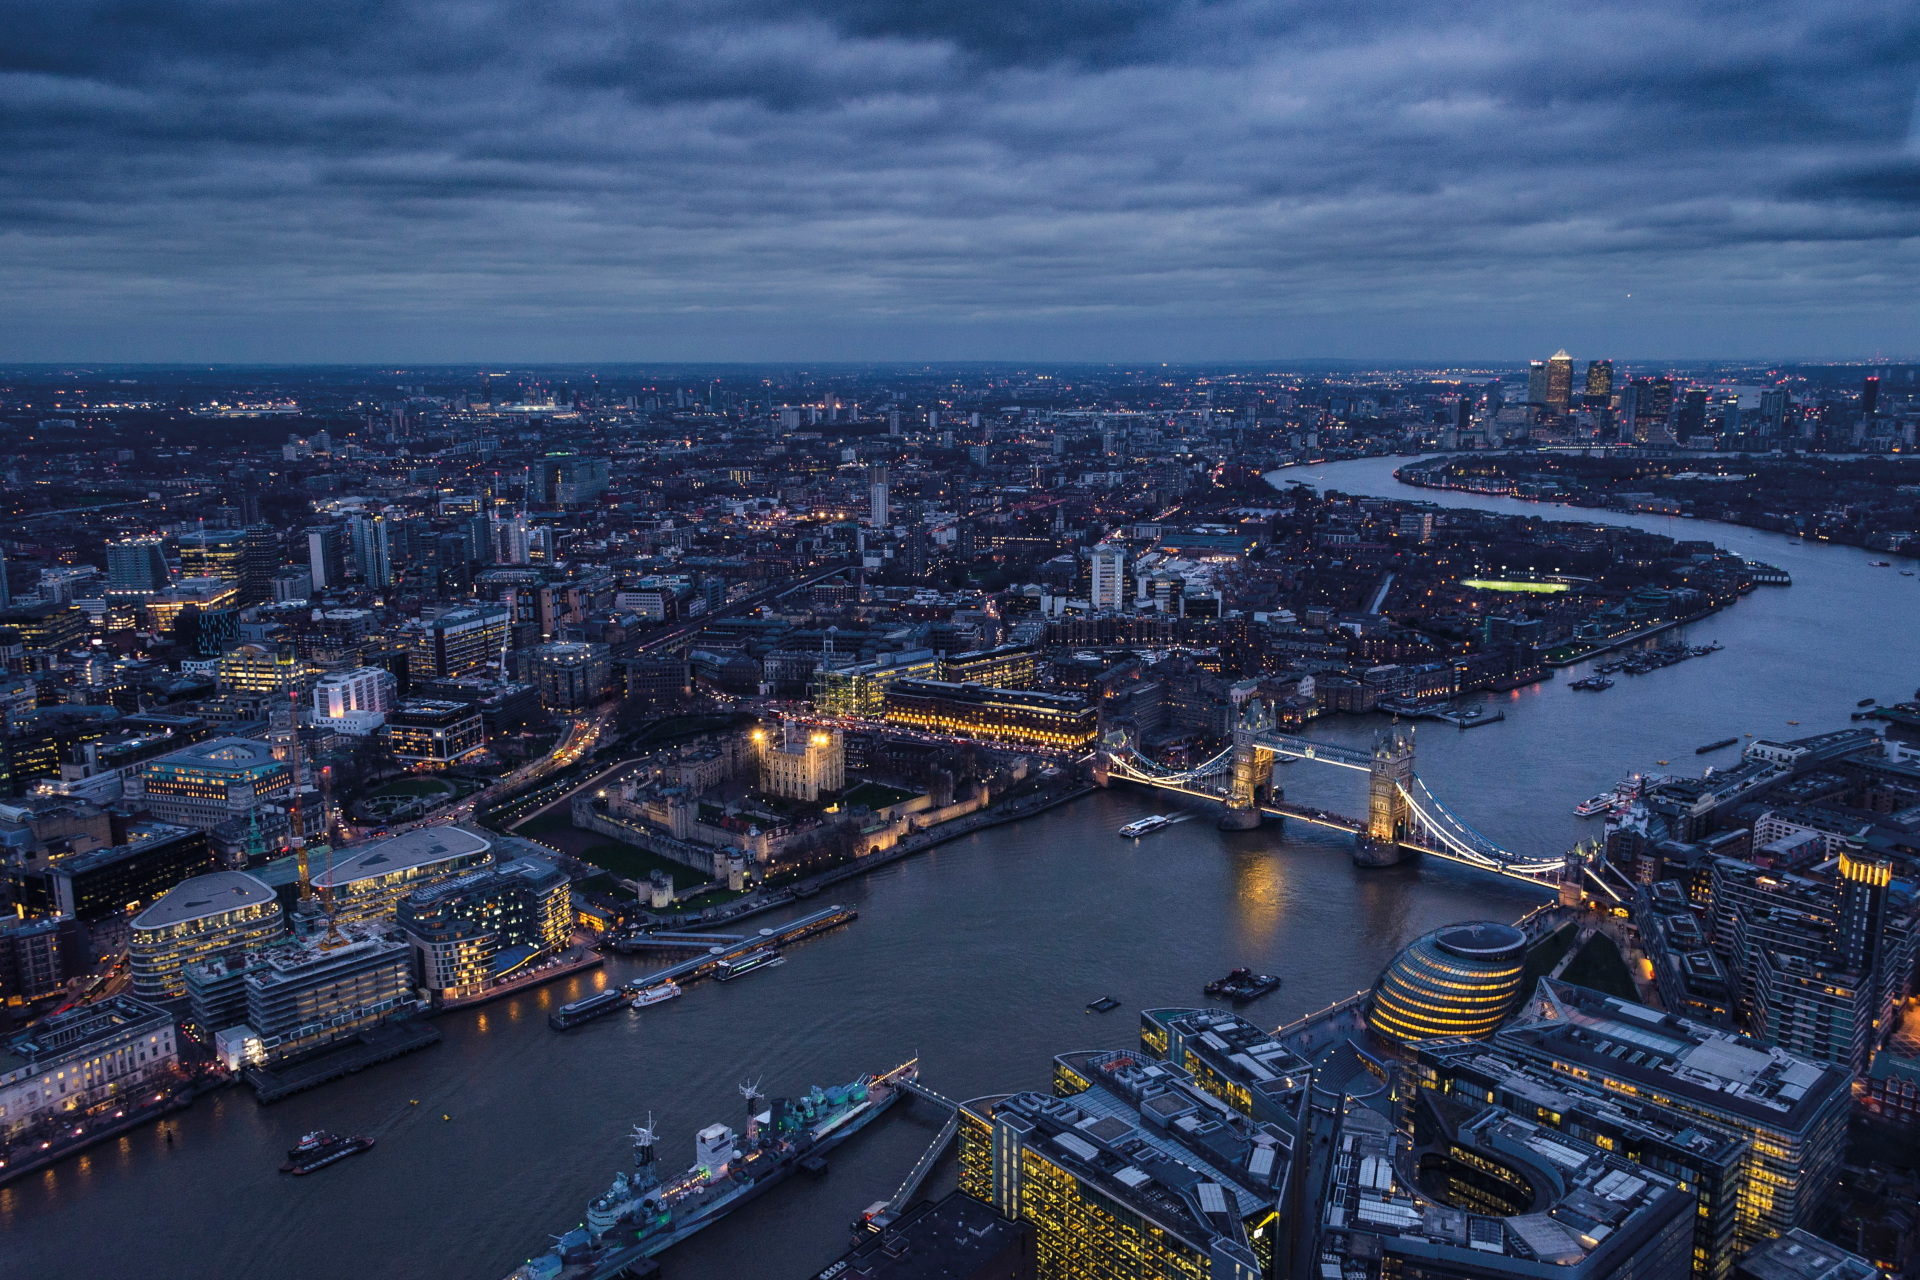 Aerial view of London at night